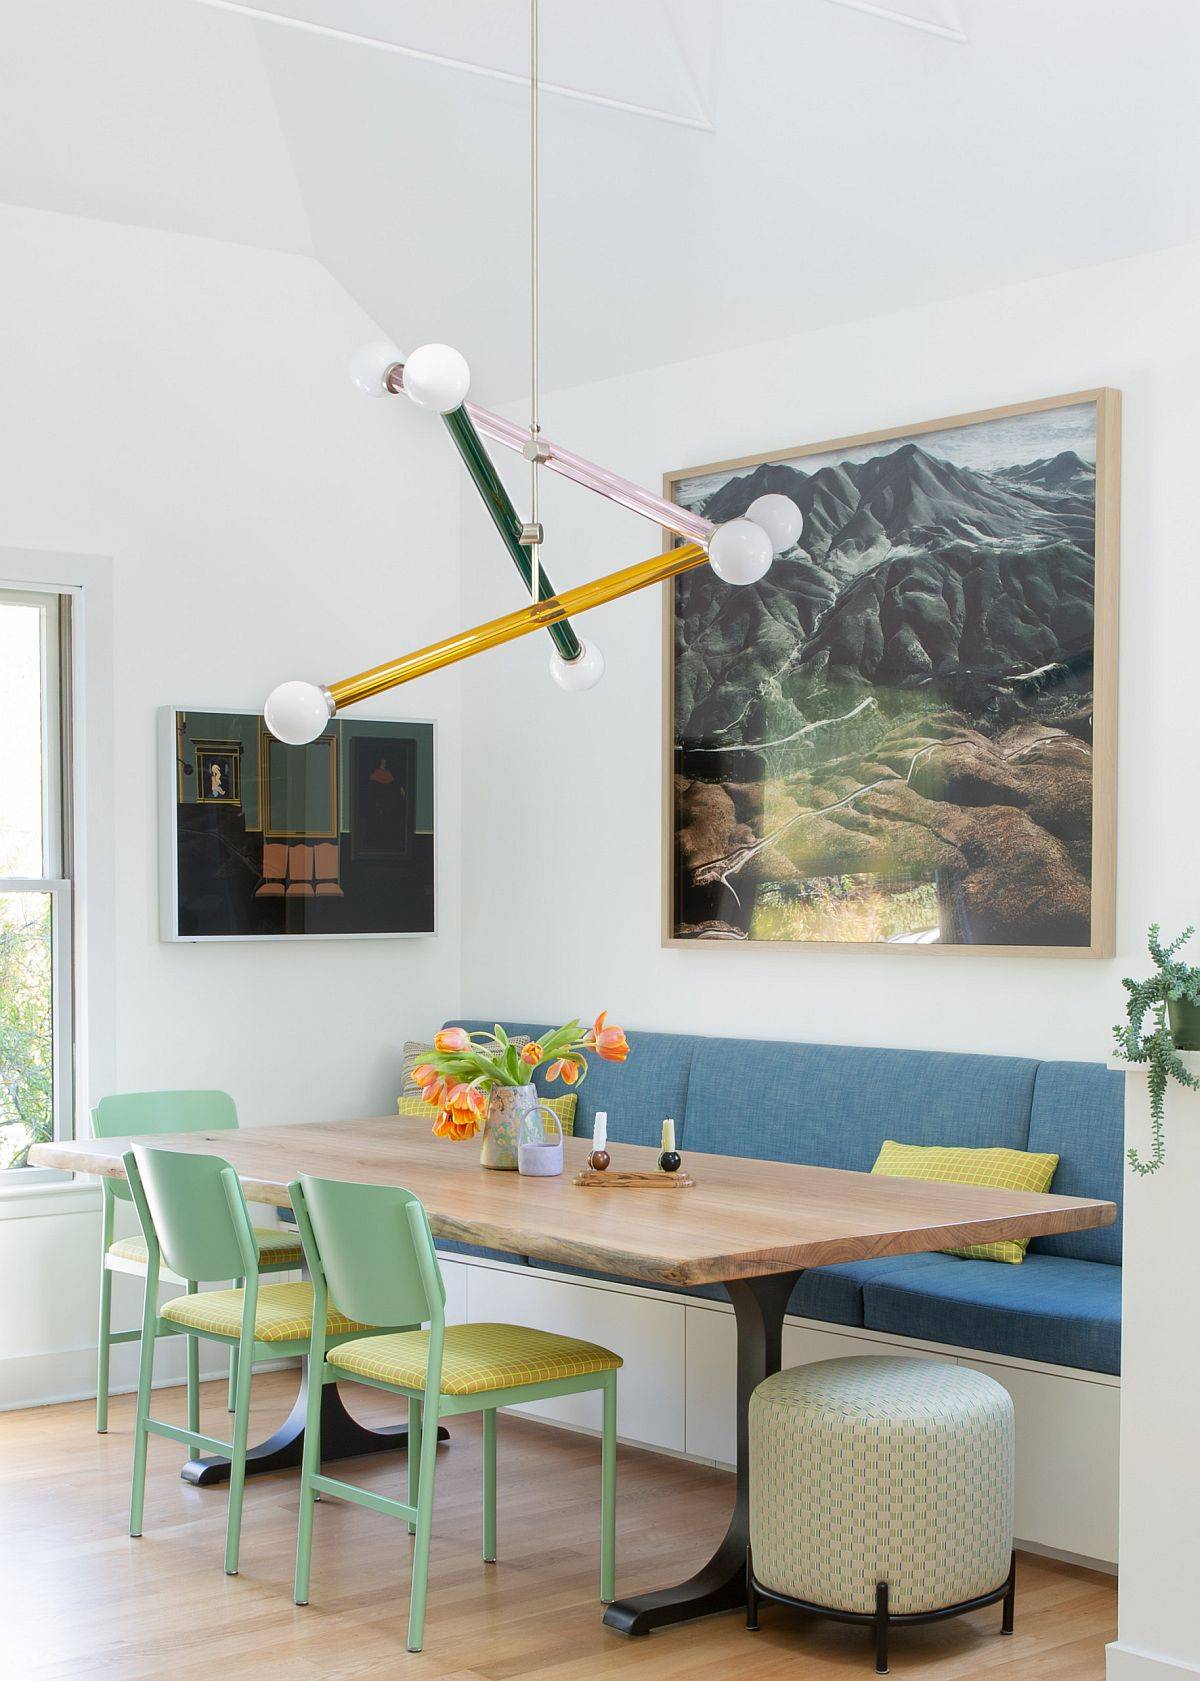 Colorful-dining-niche-with-a-space-savvy-design-51115